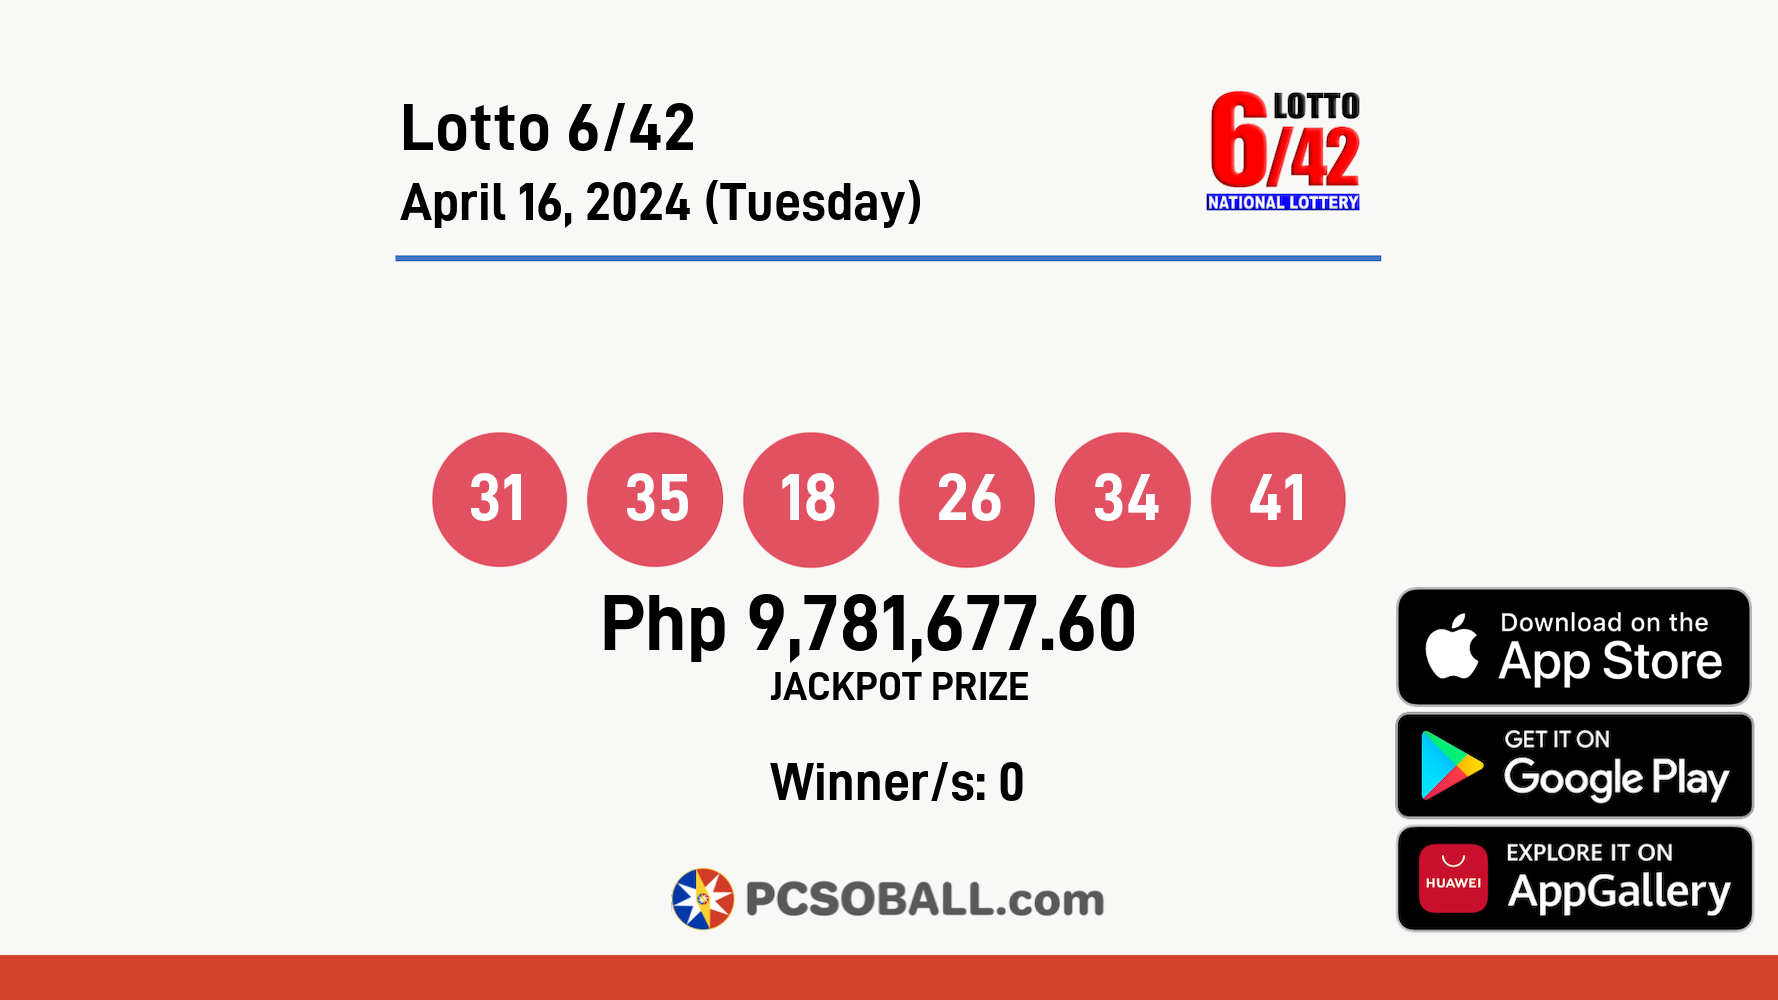 Lotto 6/42 April 16, 2024 (Tuesday) Result